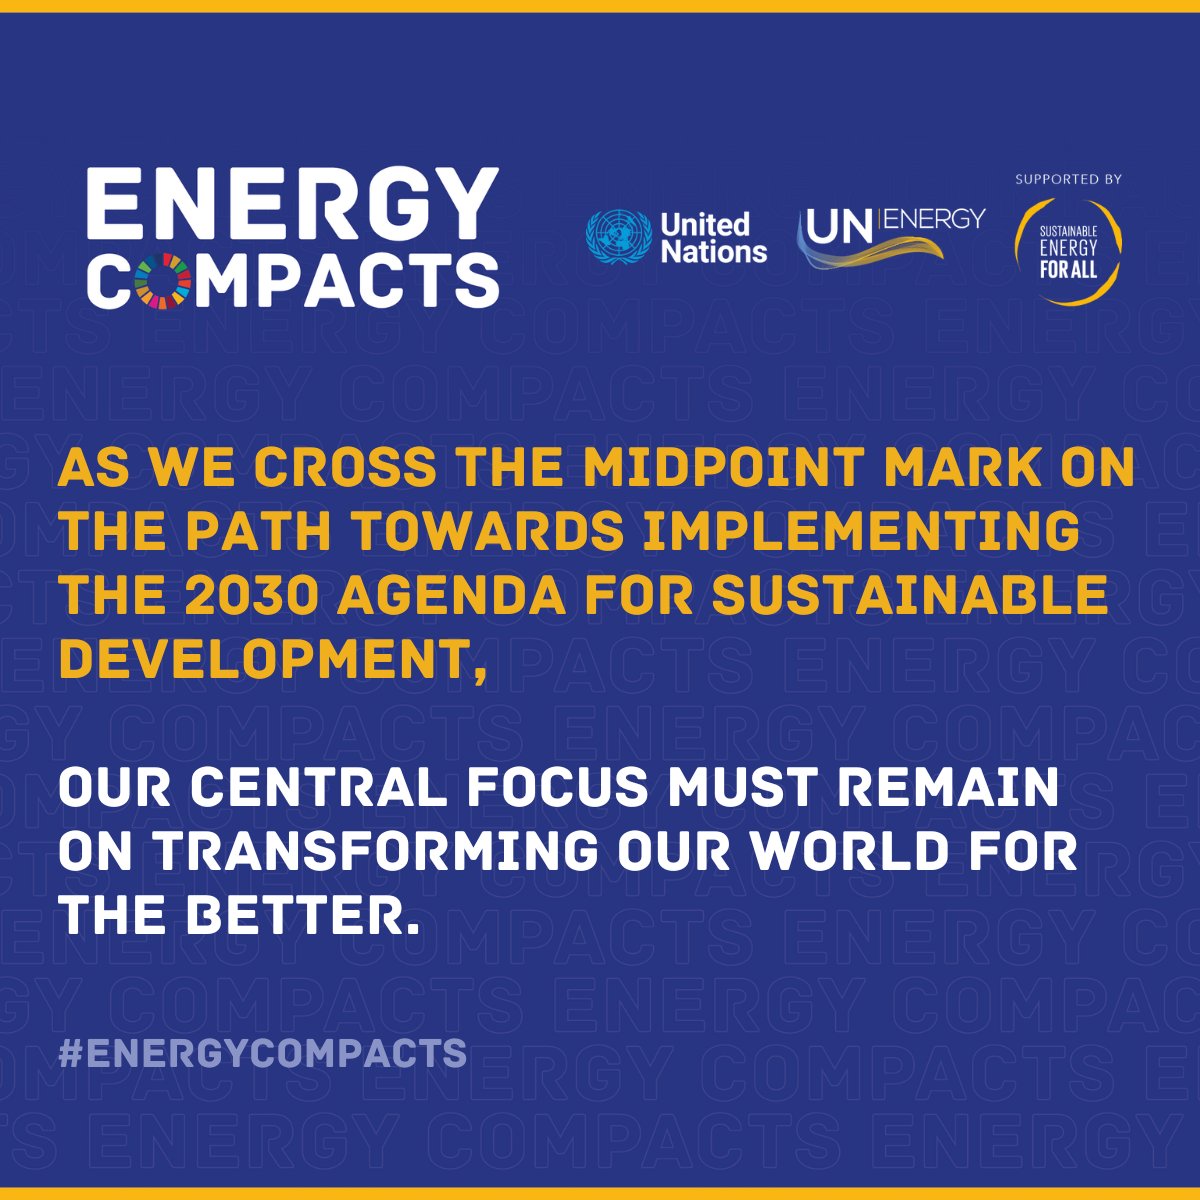 As we mark the end of the @UN Decade of Sustainable Energy for All, 2014-2024, we must raise ambition to accelerate action towards attaining #SDG7 and the 2030 Agenda for Sustainable Development by catalysing innovative solutions, investments and multi-stakeholder partnerships.